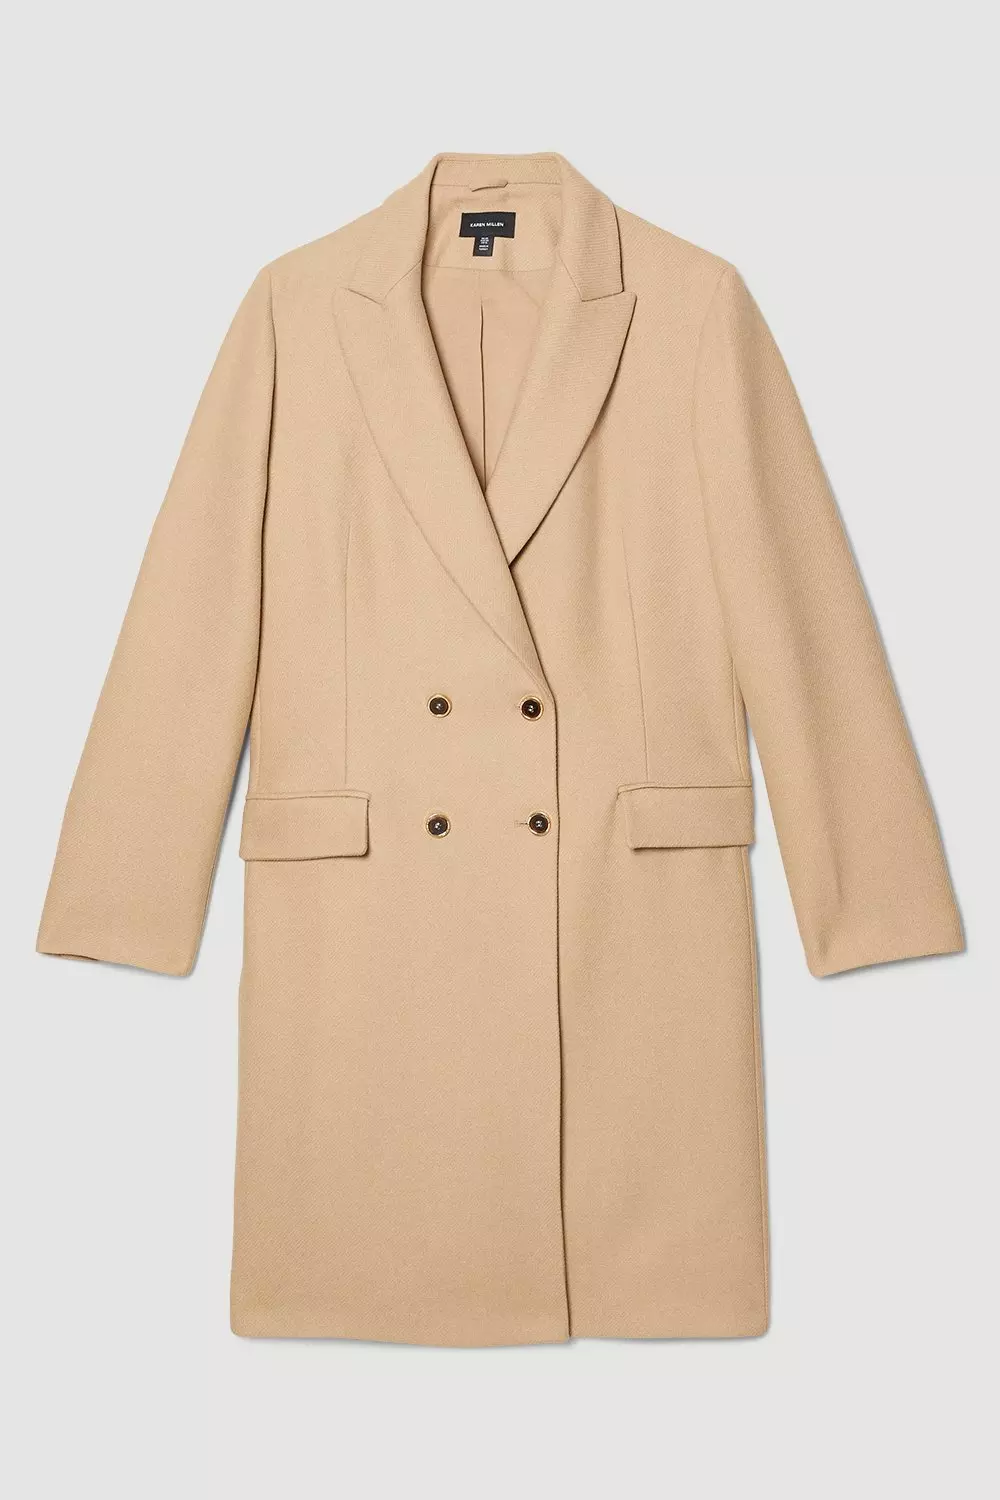 Double Breasted Tailored Coat – SENTALER